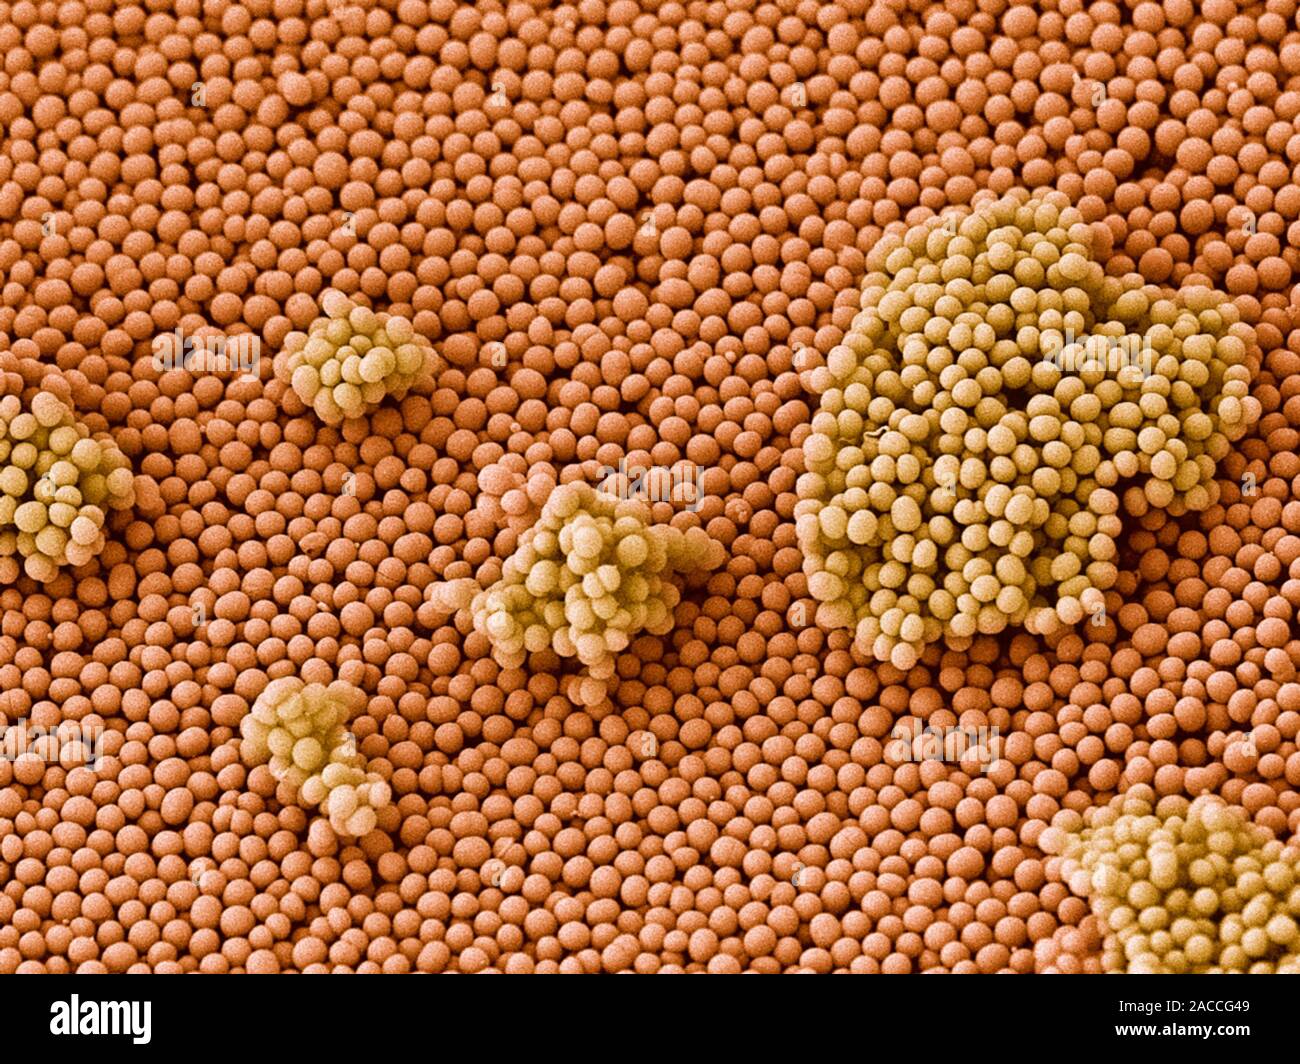 Streptococcus bacteria. Coloured scanning electron micrograph (SEM) of Streptococcus sp. bacteria. Streptococci are round Gram-positive bacteria. Some Stock Photo